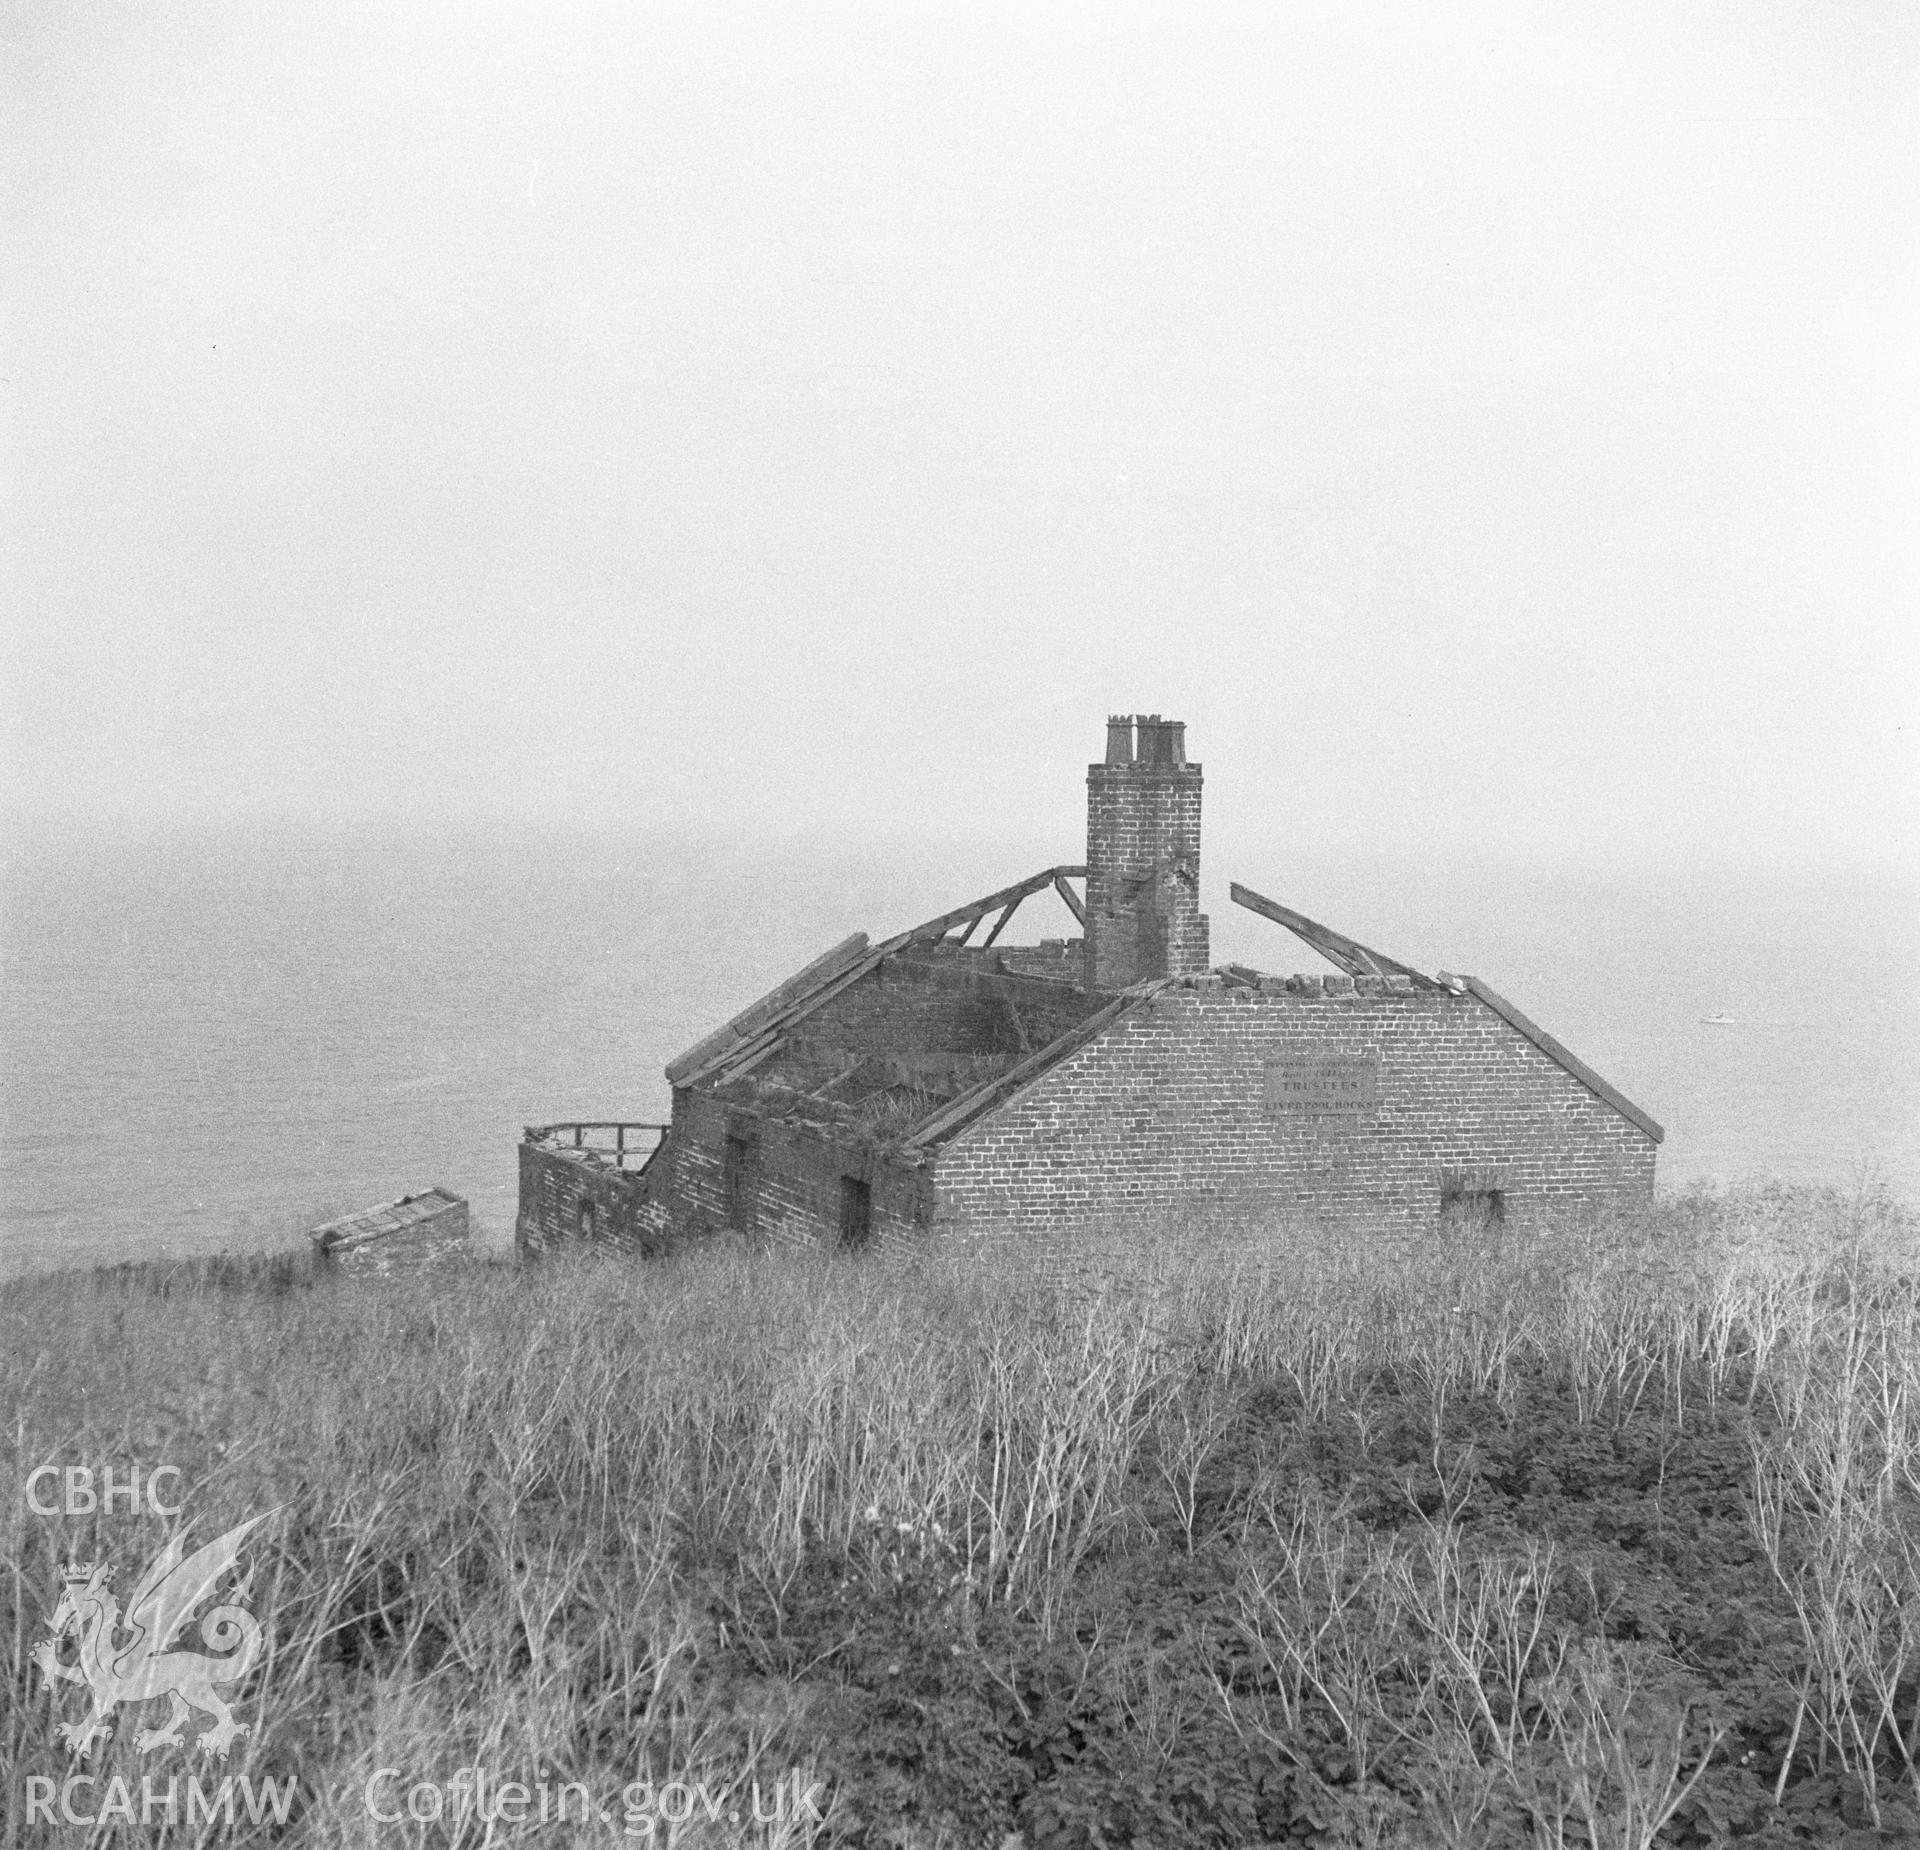 Digital copy of a black and white negative showing a roofless house on Puffin Island